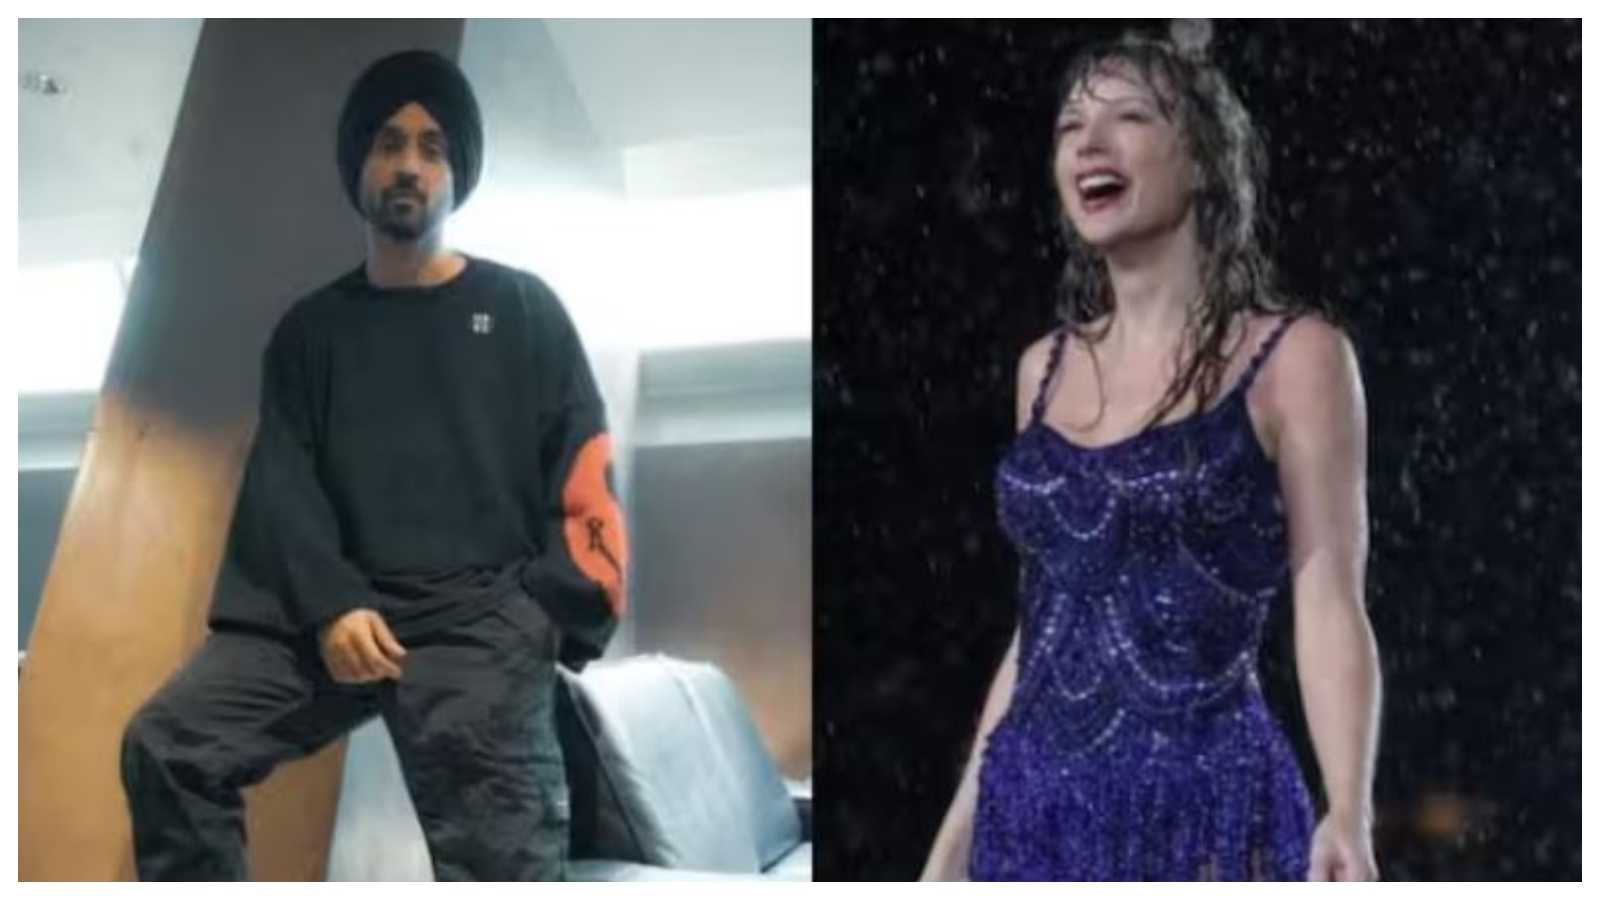 Diljit Dosanjh breaks silence on reports of him being 'touchy' with Taylor Swift at Vancouver restaurant